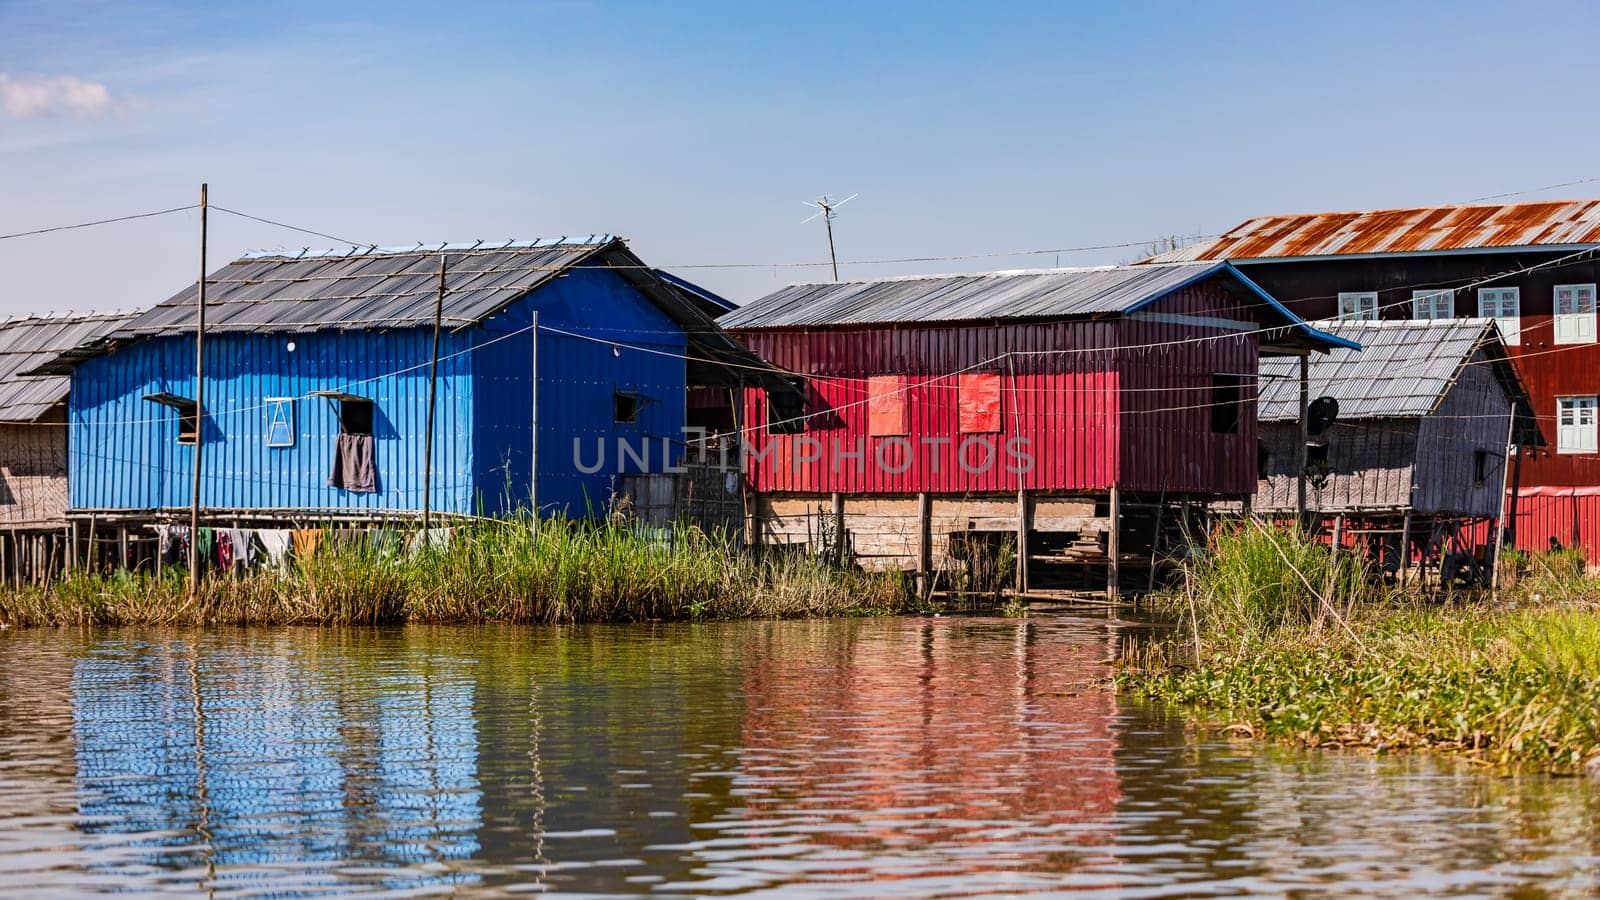 Traditional simple houses on stilts in the idyllic Inle Lake are a tourist destination in Myanmar, Asia